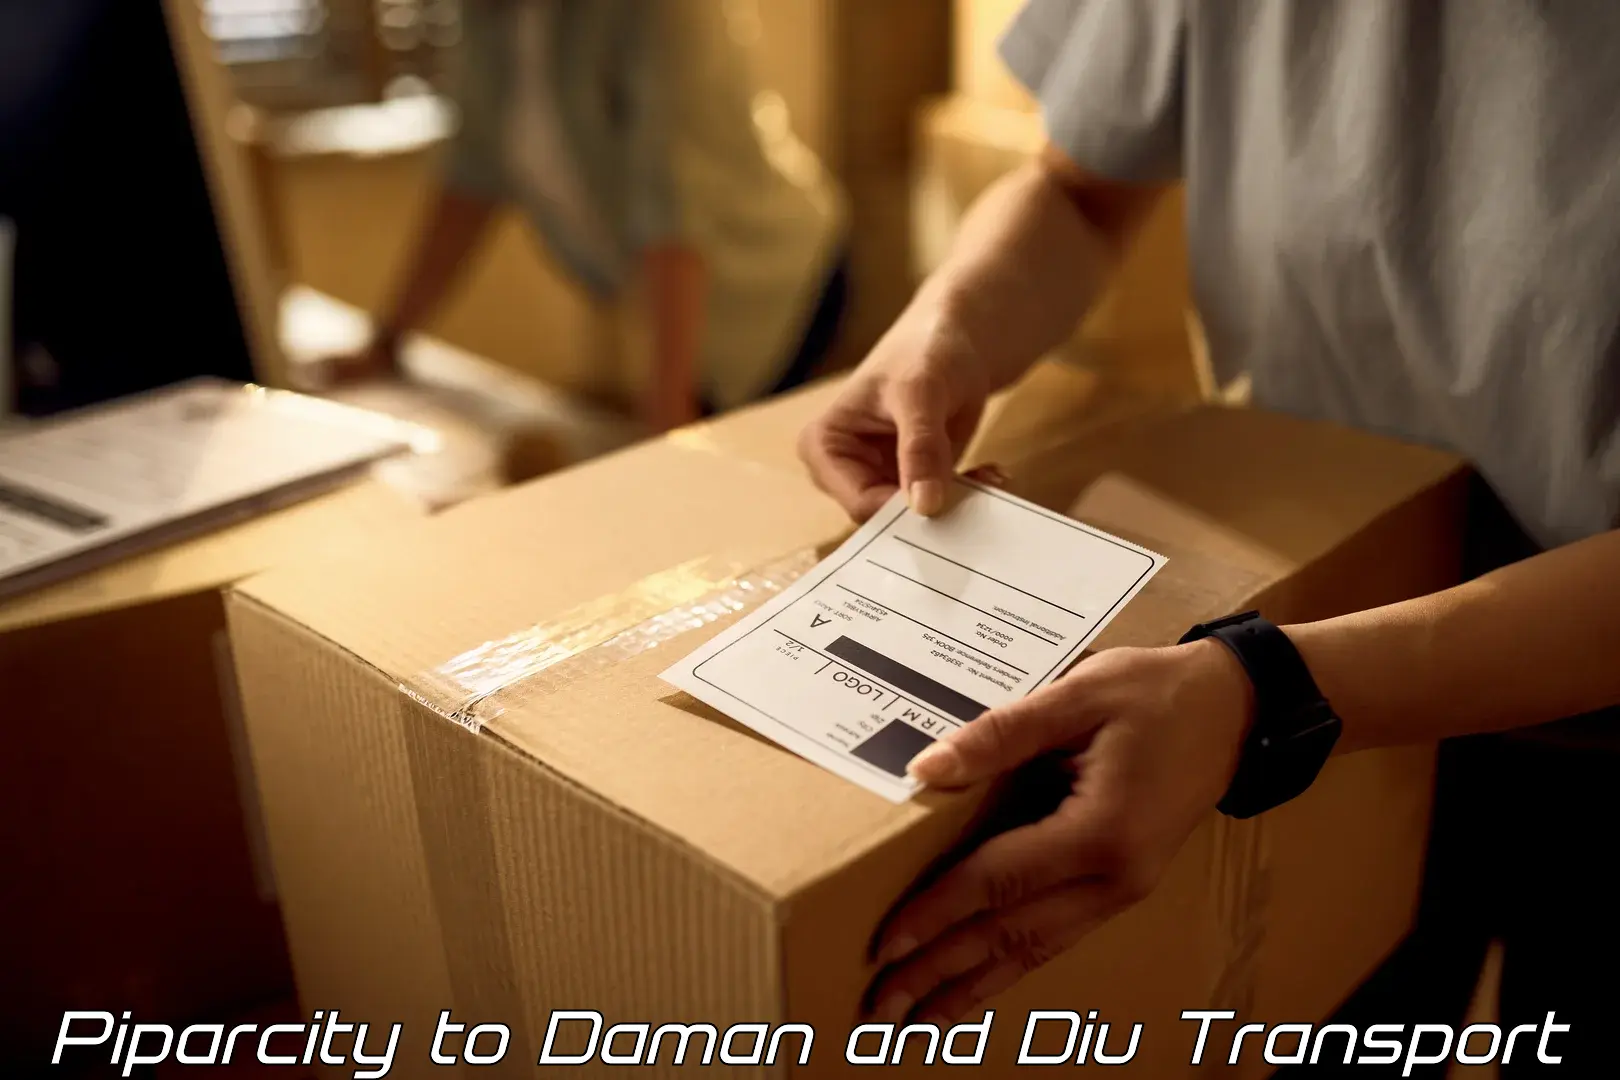 Lorry transport service Piparcity to Daman and Diu